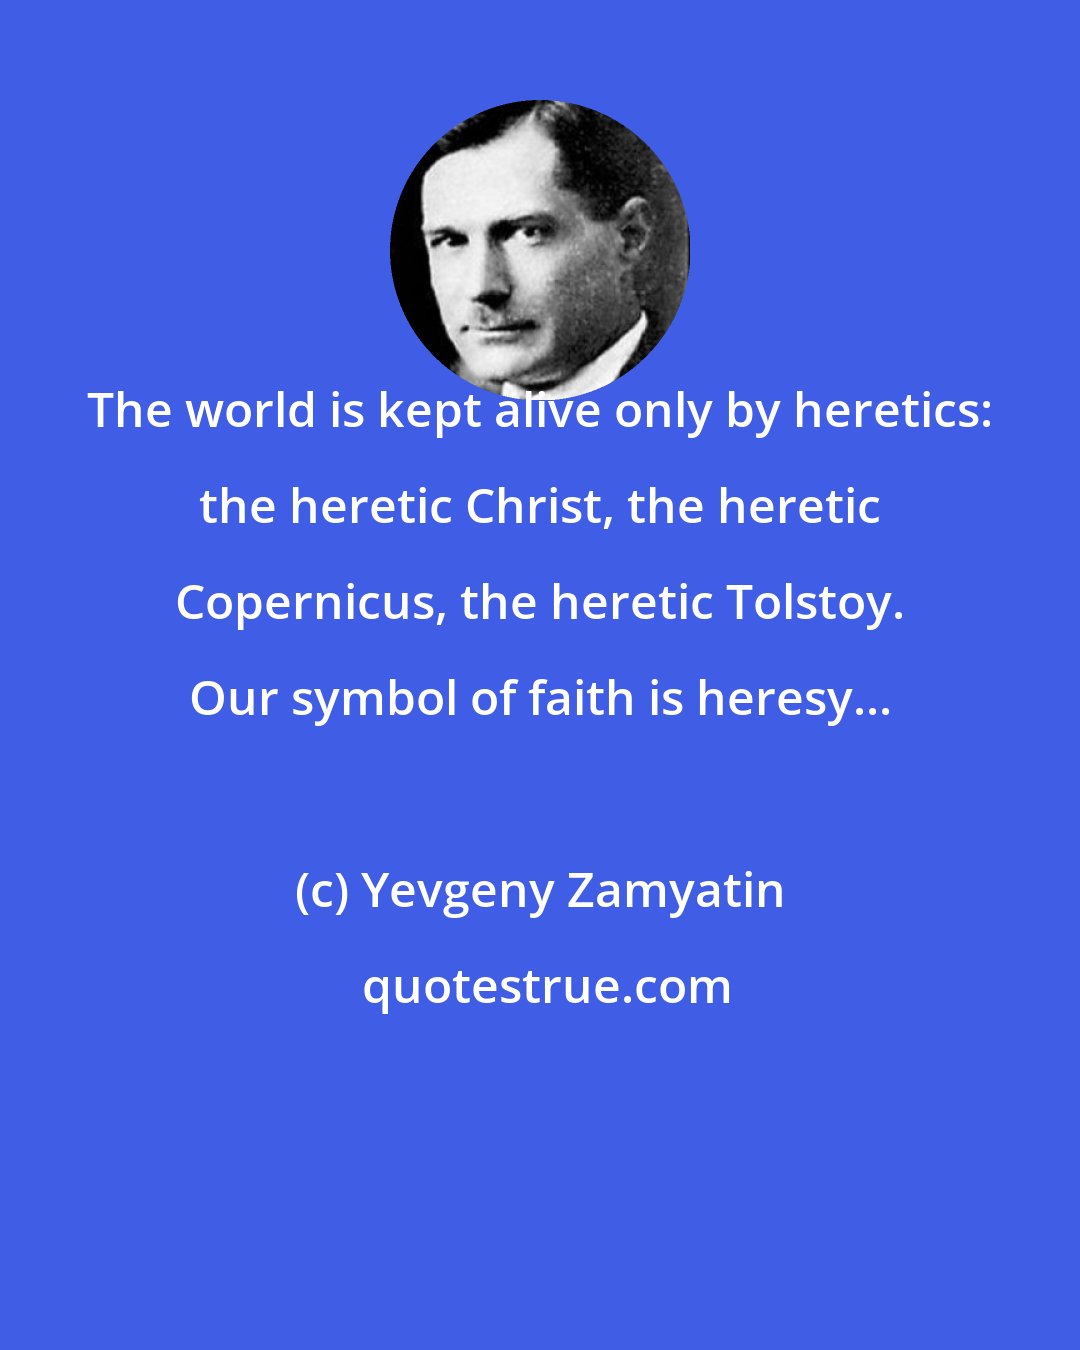 Yevgeny Zamyatin: The world is kept alive only by heretics: the heretic Christ, the heretic Copernicus, the heretic Tolstoy. Our symbol of faith is heresy...